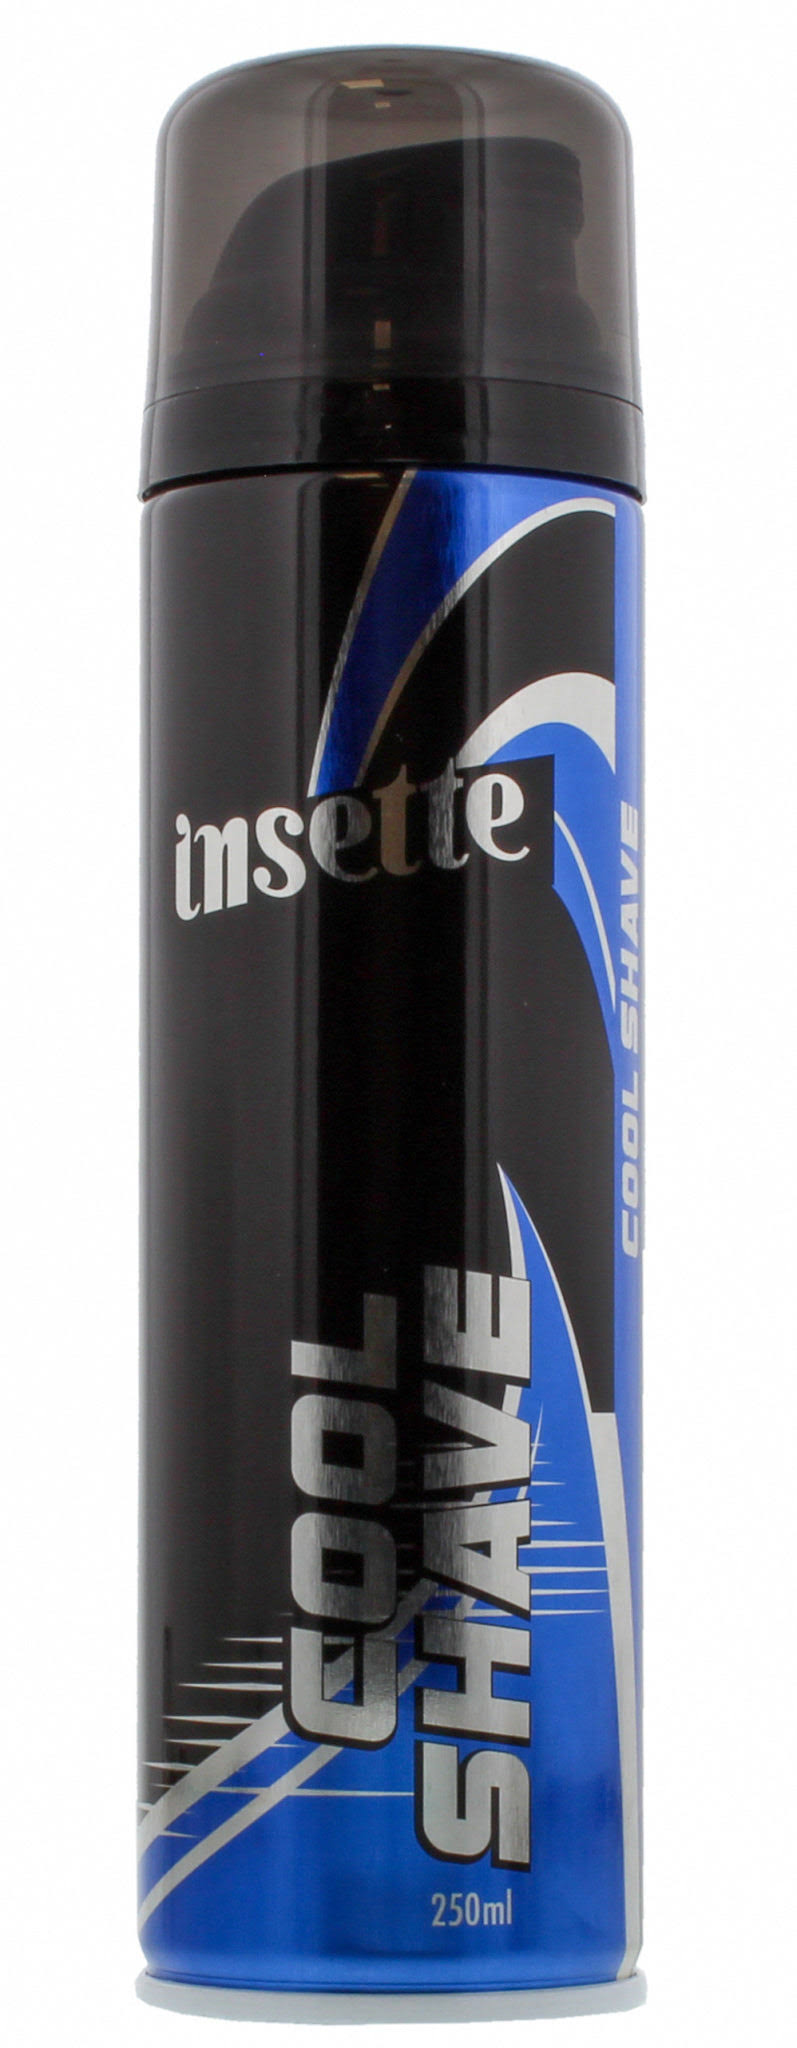 Insette 250ml Shave Foam Cool Shave - 16/11/2024 - Use